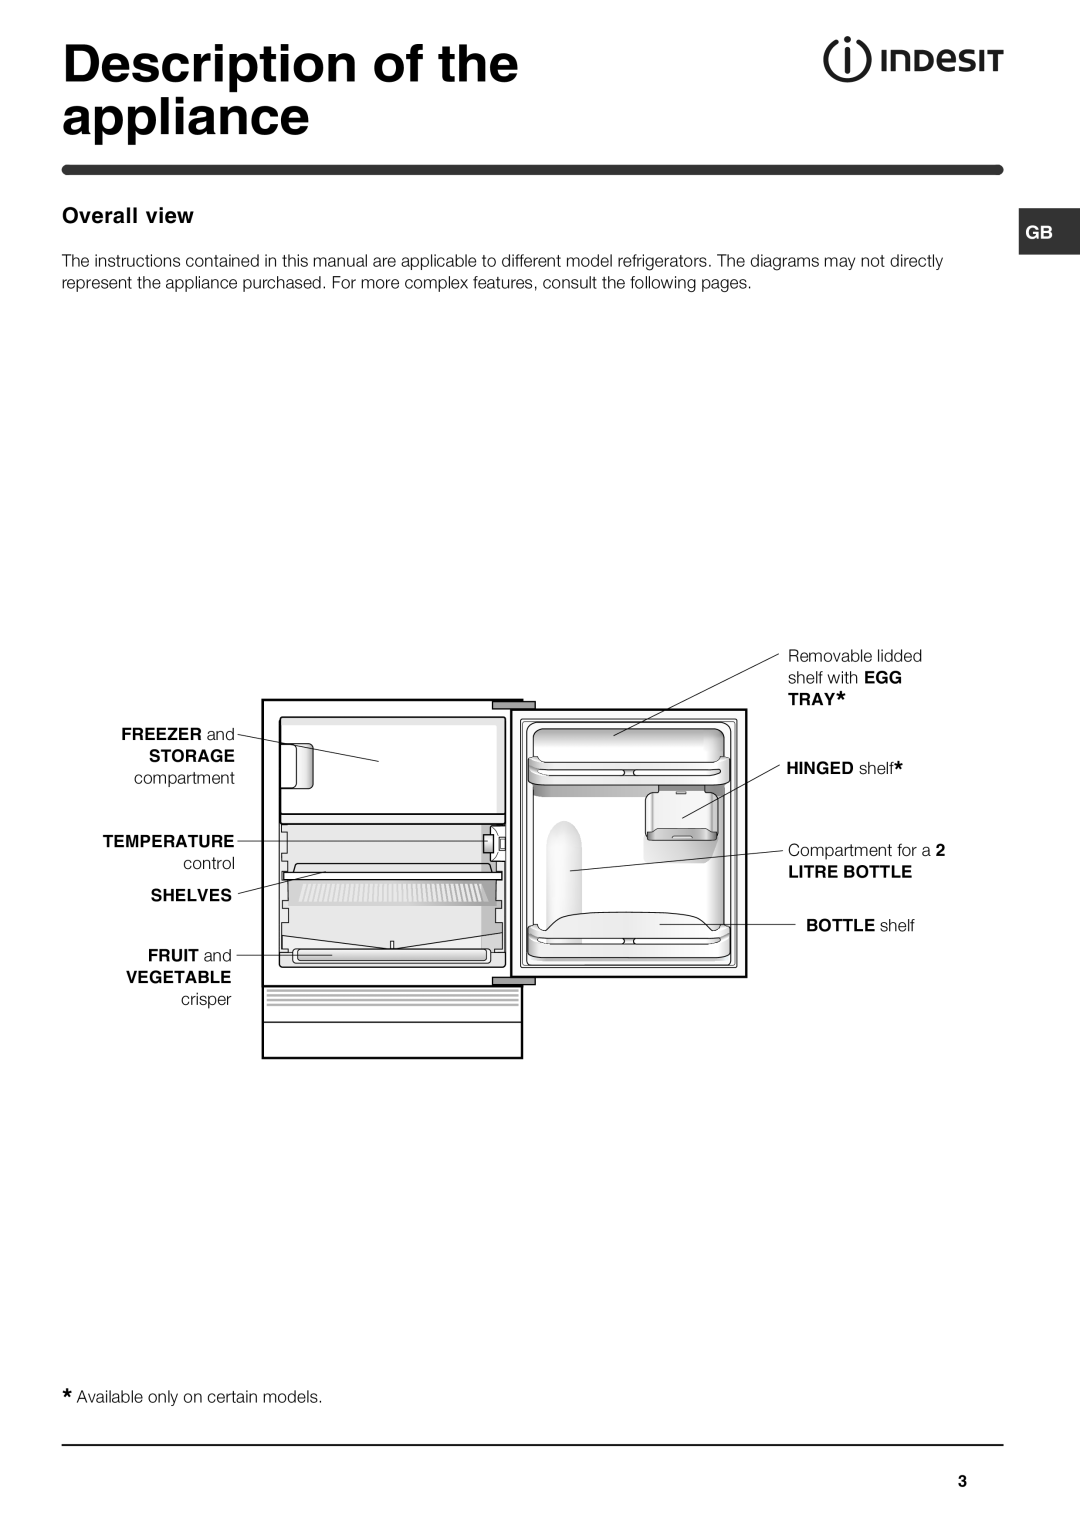 Indesit INTSZ1610UK Description of the appliance, Overall view, FREEZER and, Storage, compartment, Temperature, control 